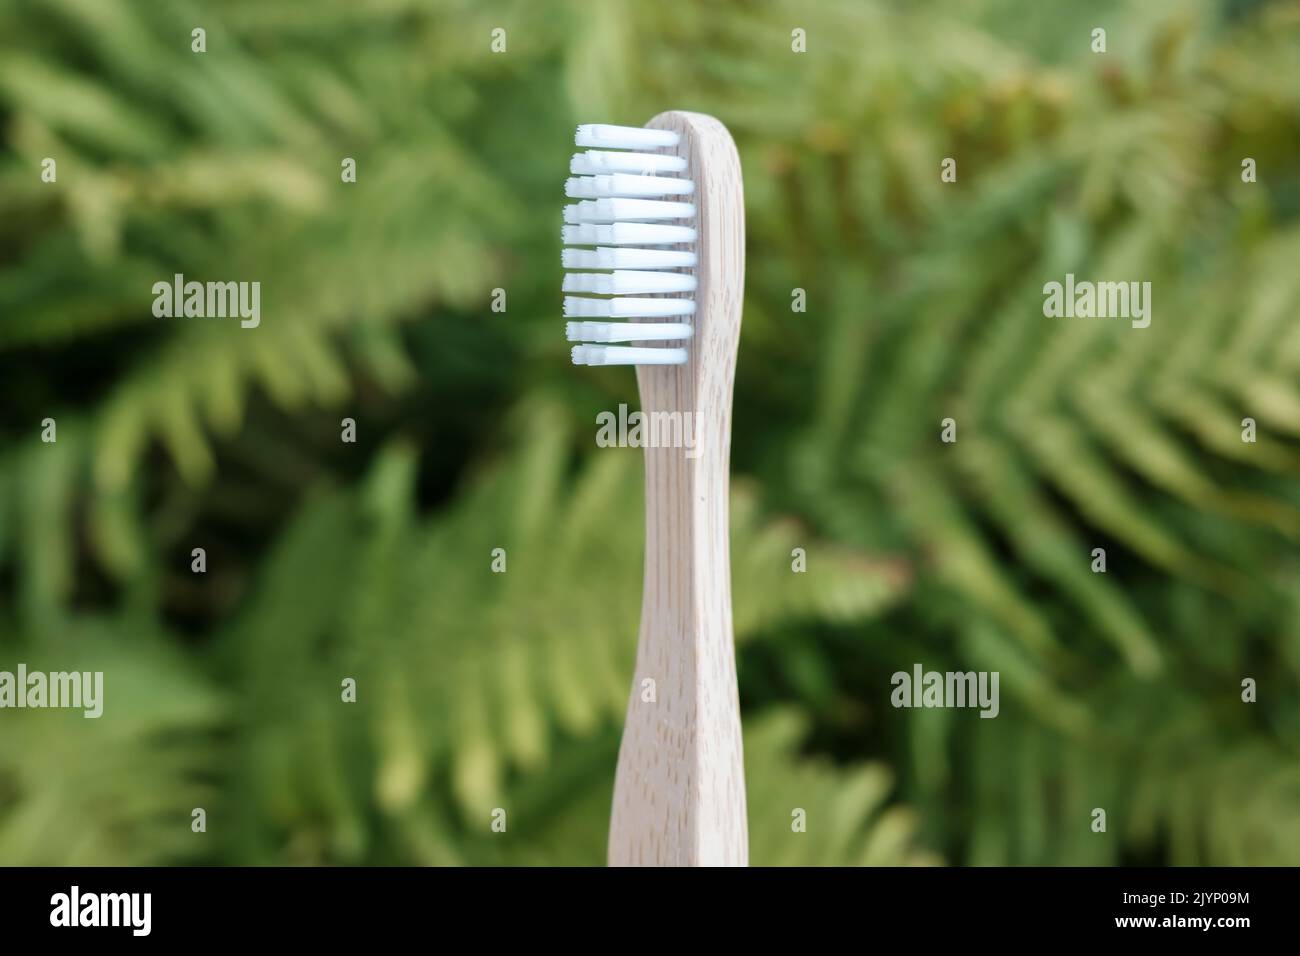 Biodegradable bamboo toothbrush on a blurred background of fern leaves. Environmental care concept. Stock Photo